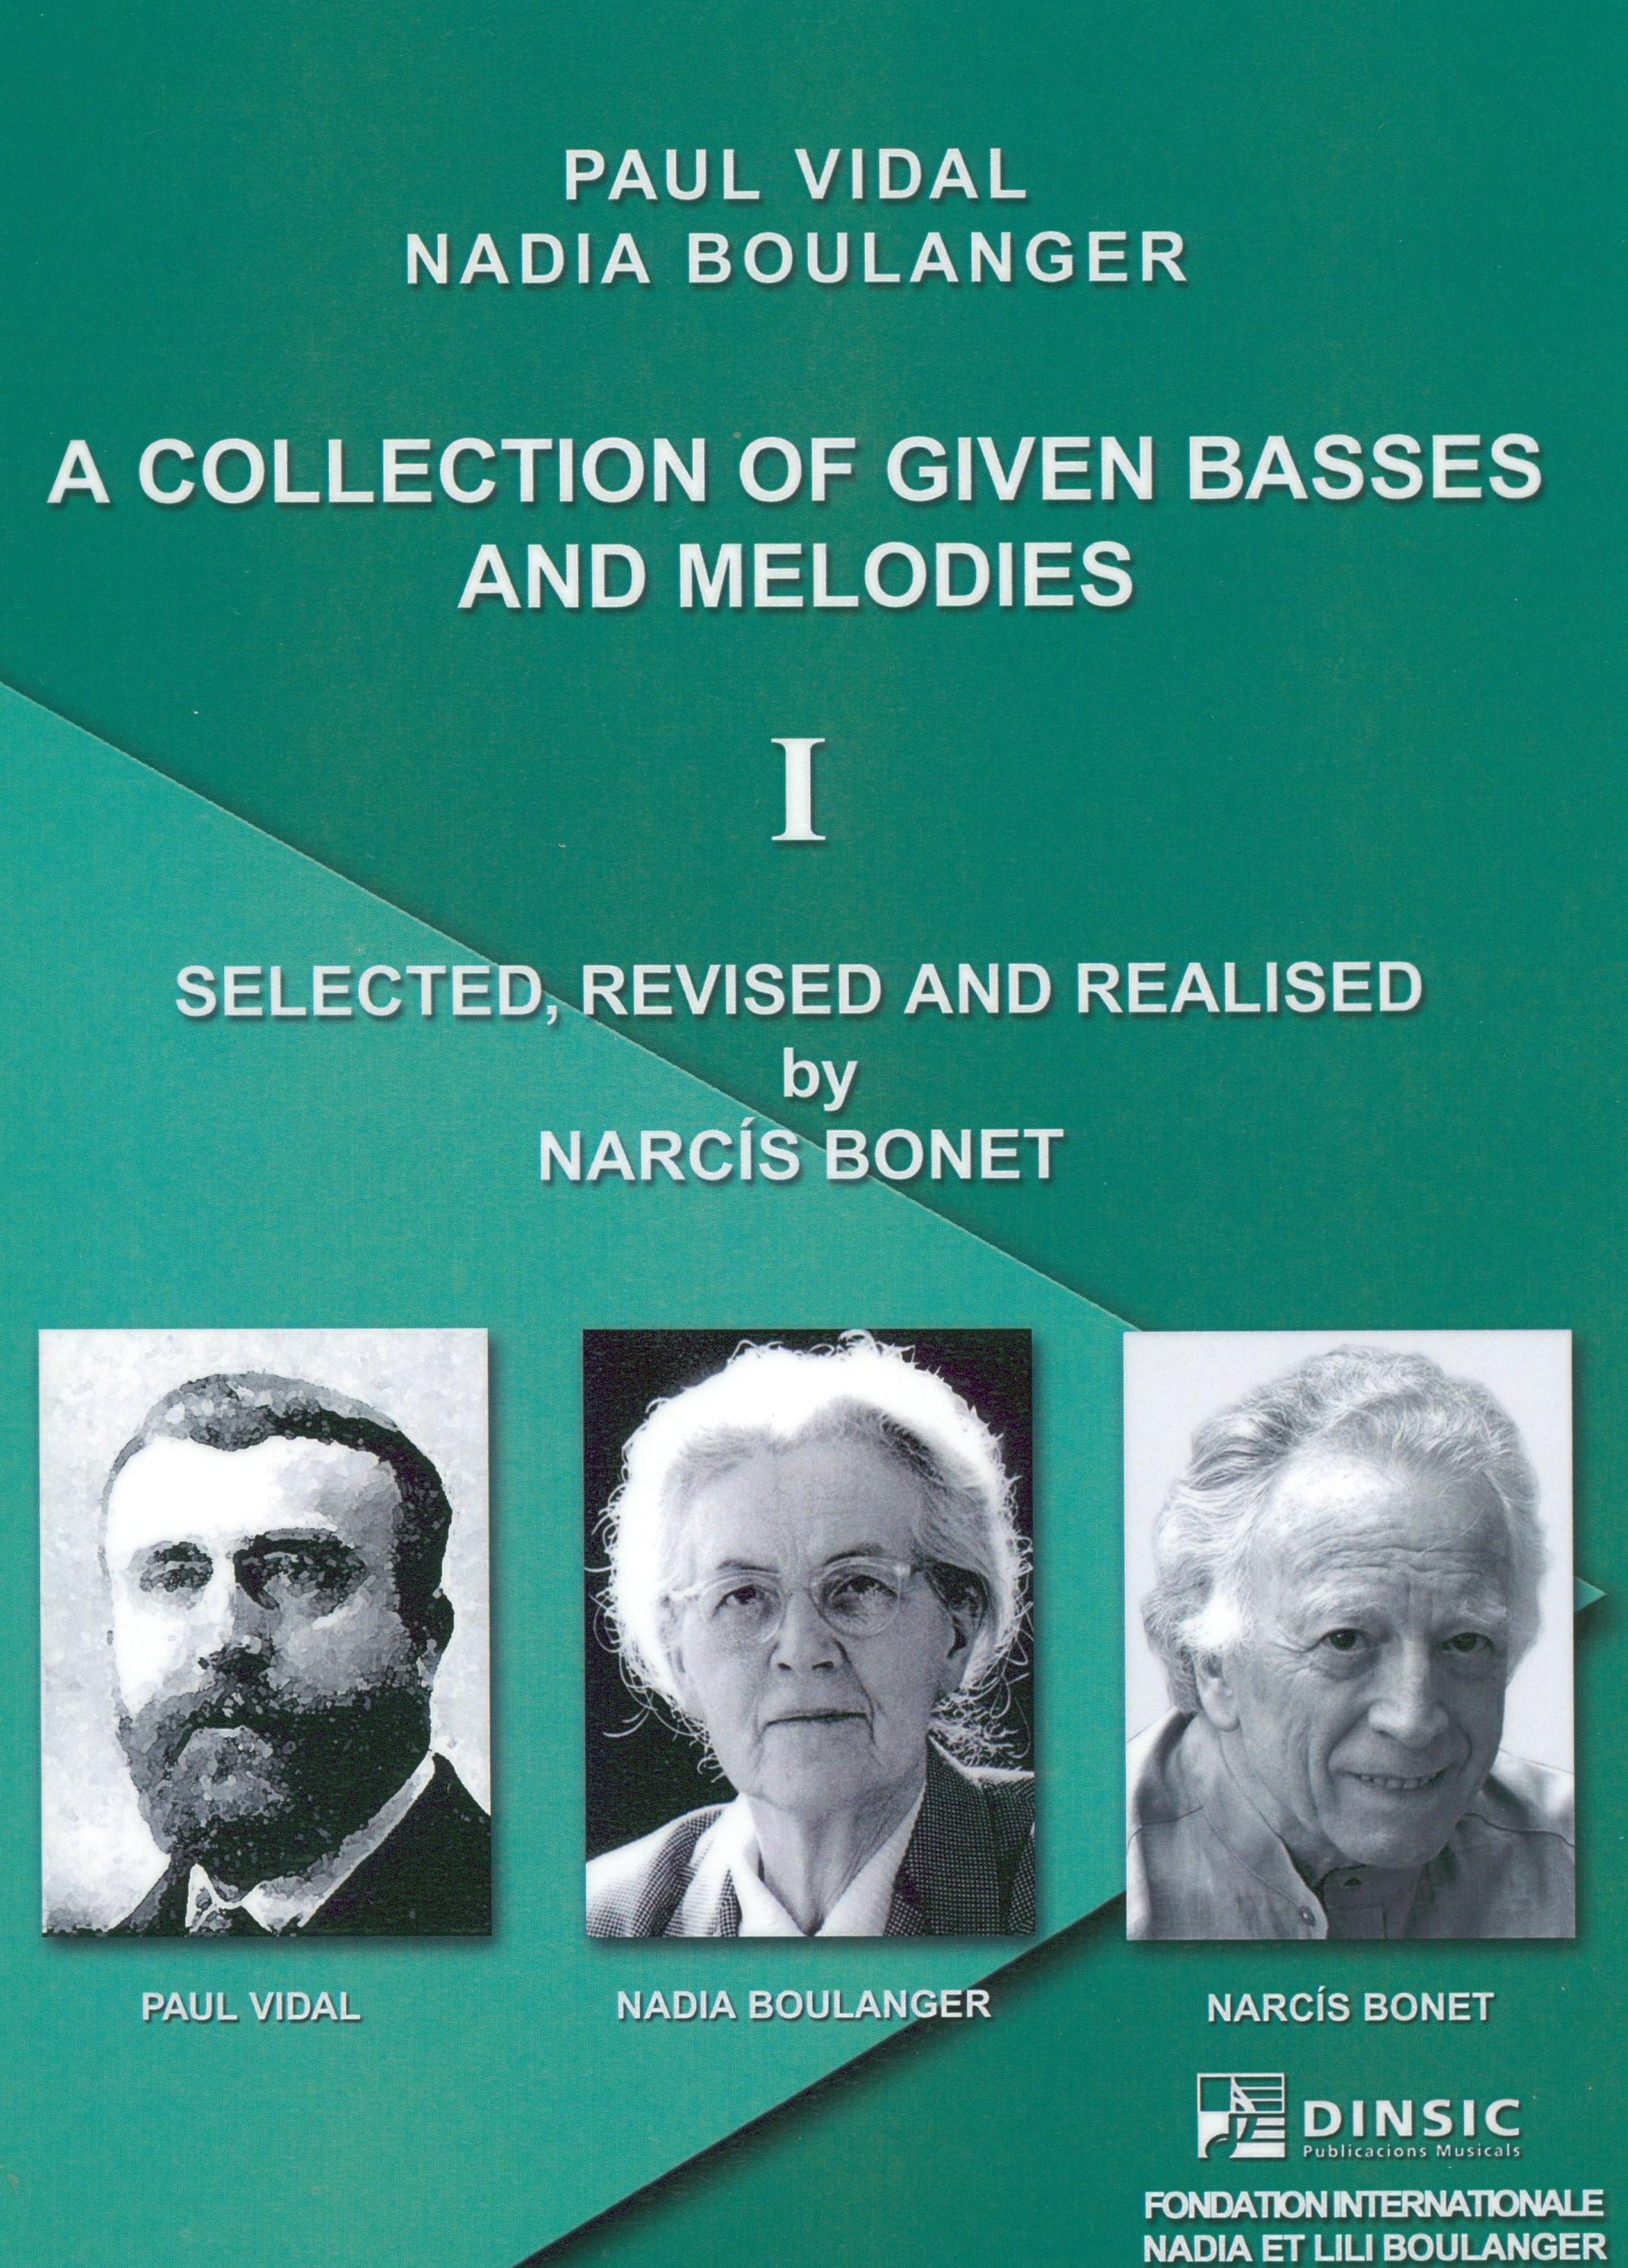 A Collection of Given Basses and Melodies - Volume 1